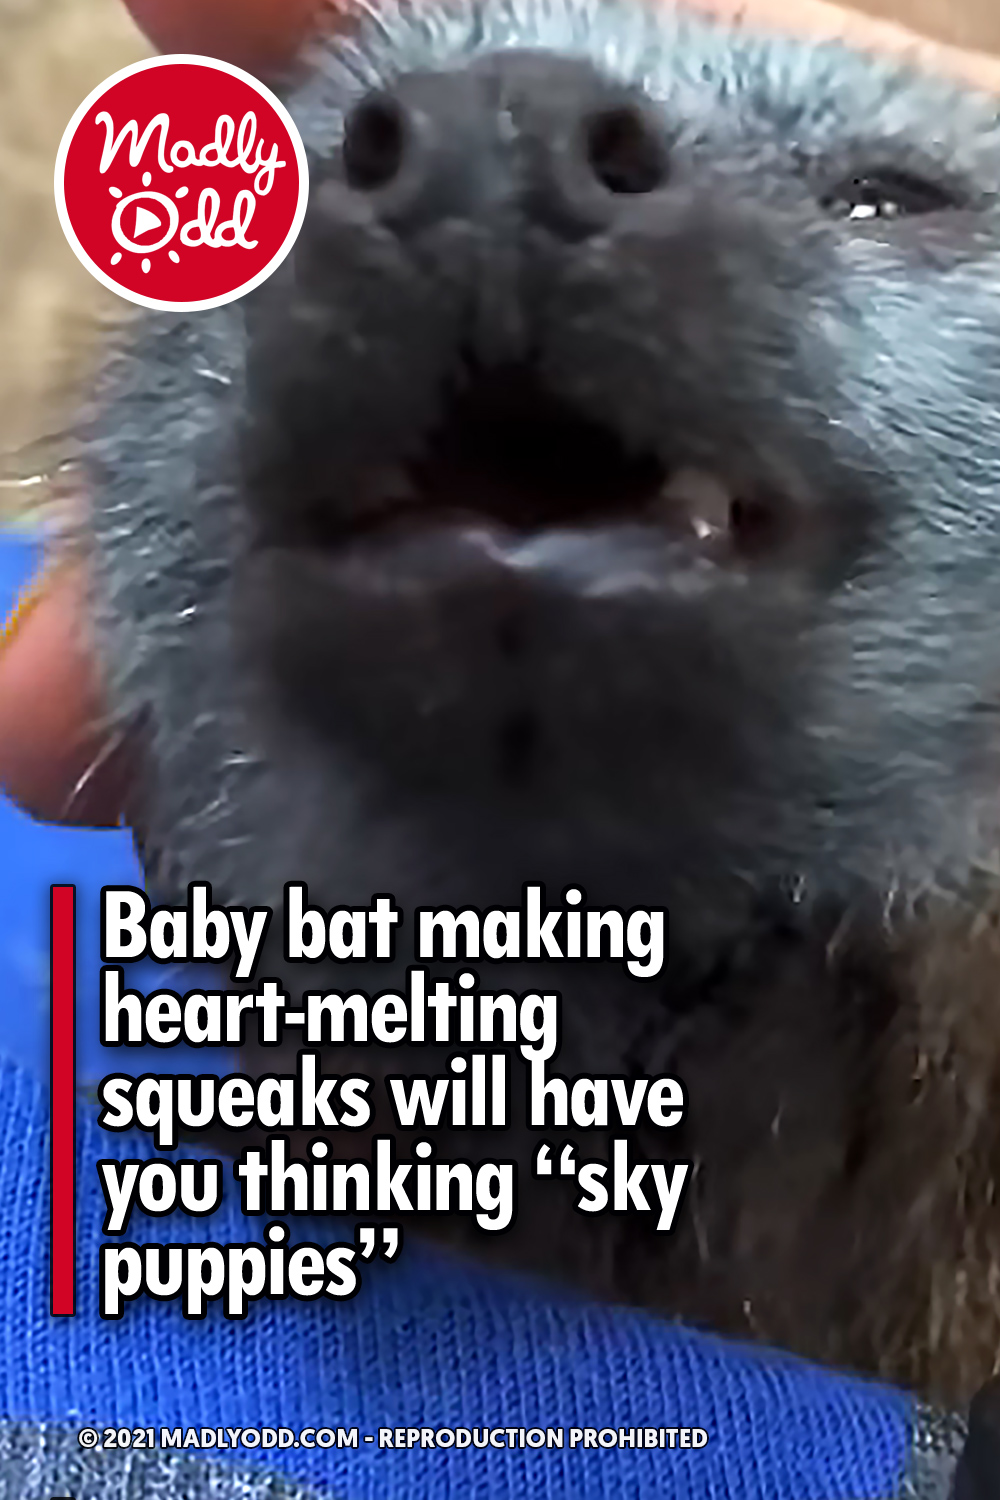 Baby bat making heart-melting squeaks will have you thinking “sky puppies”